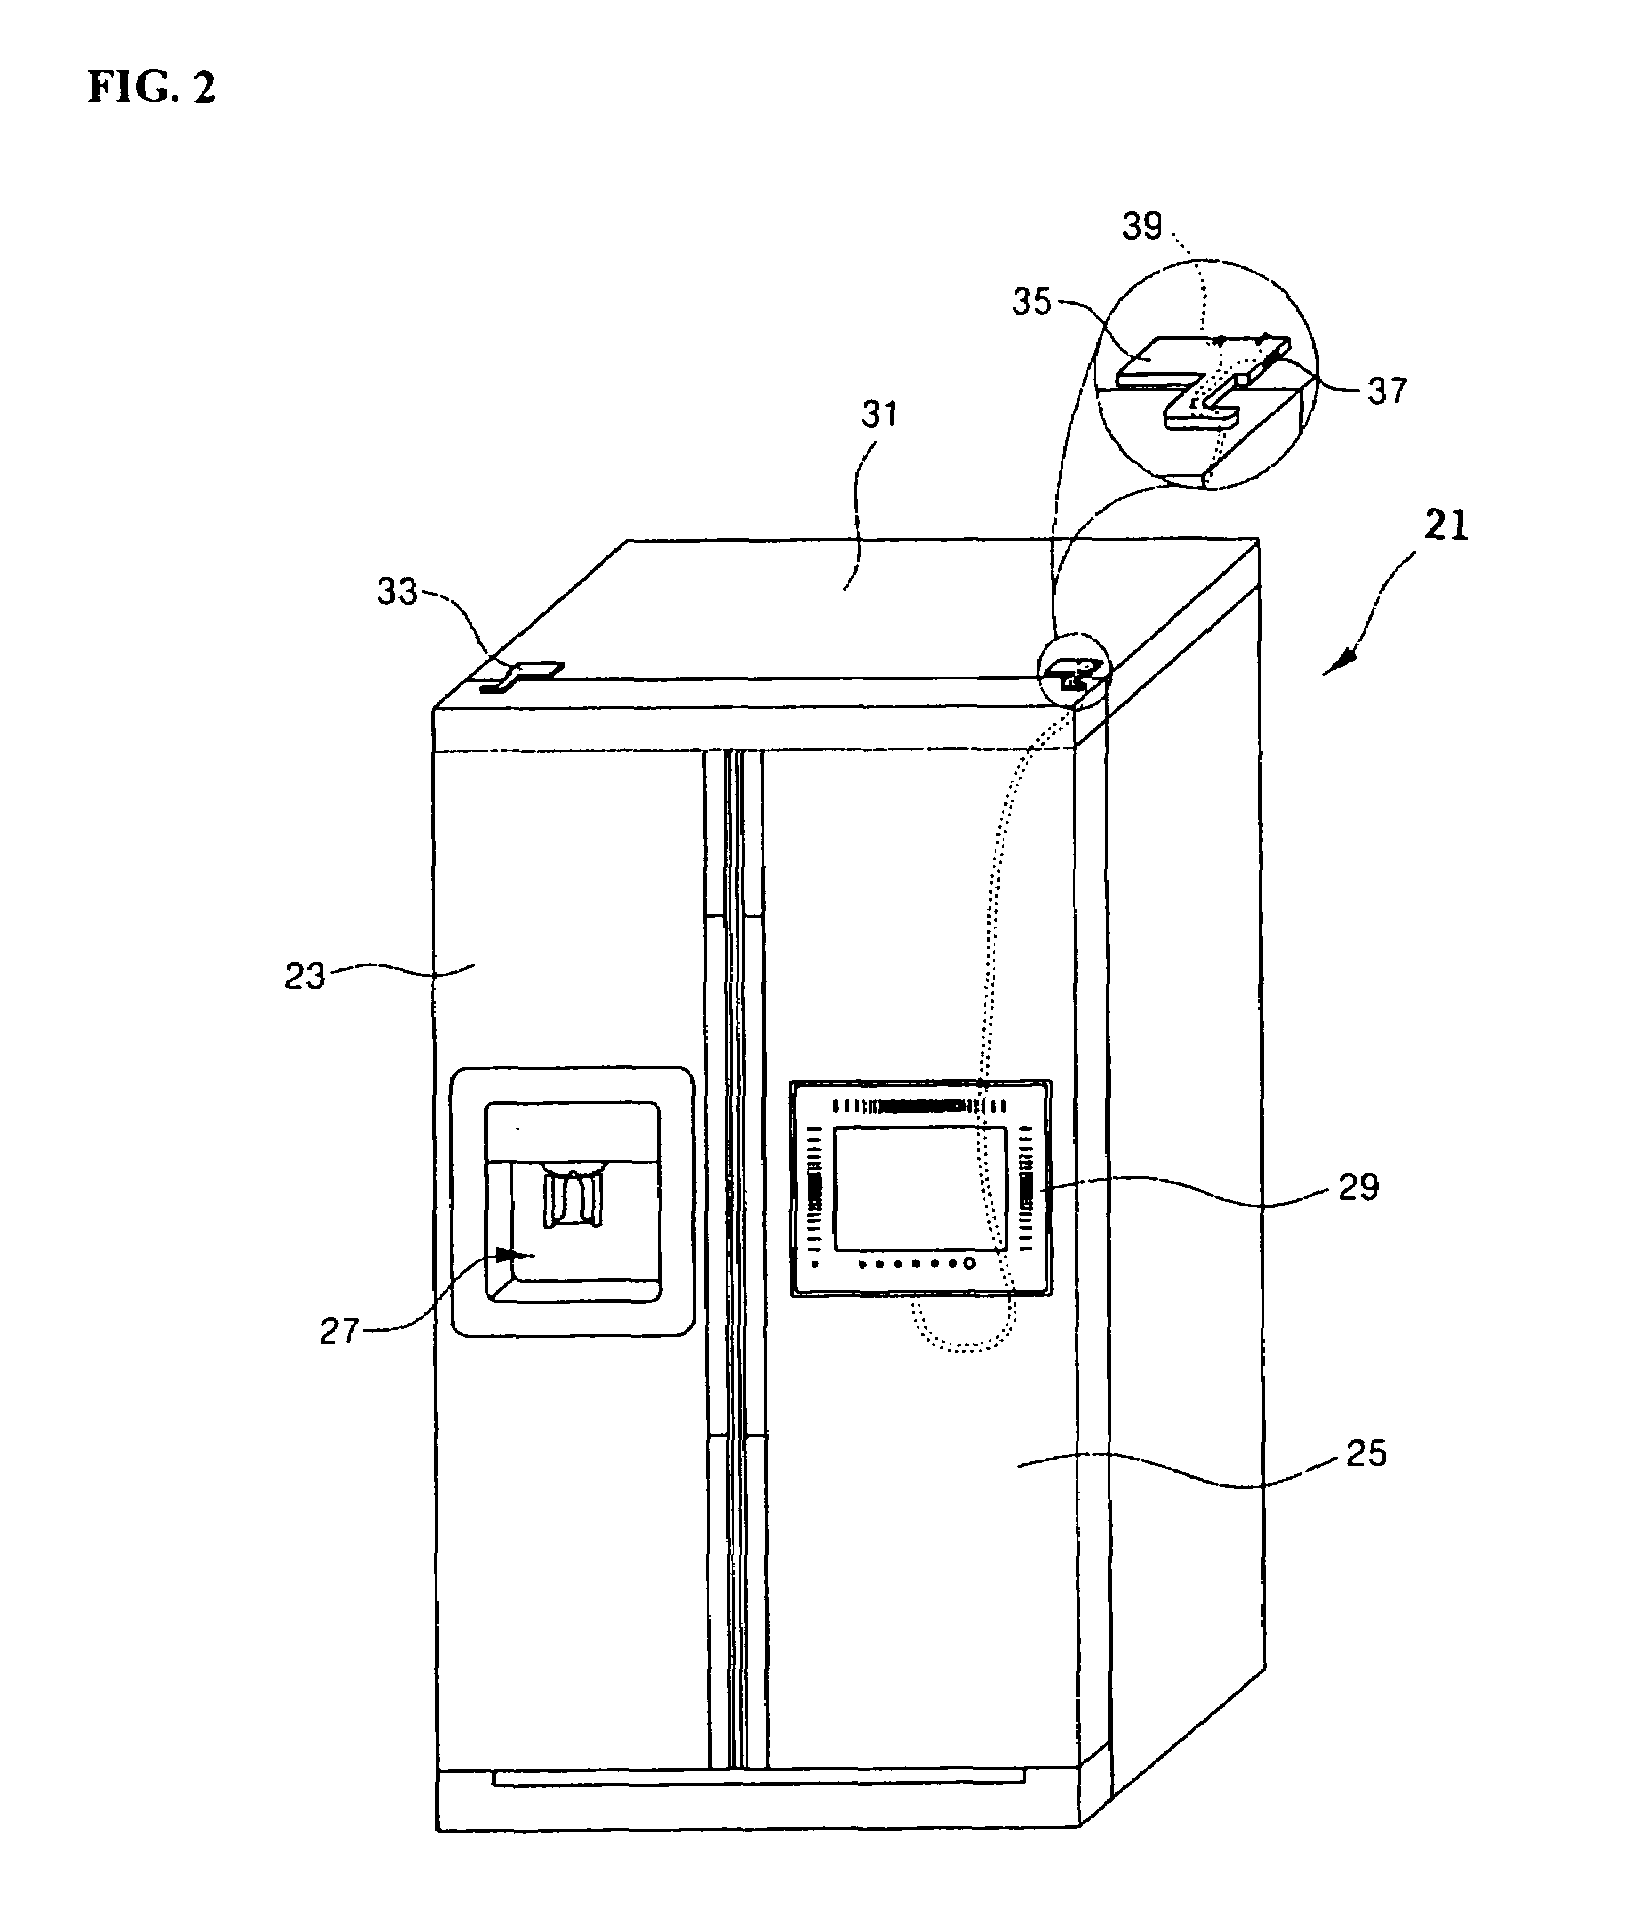 Switching device for refrigerator